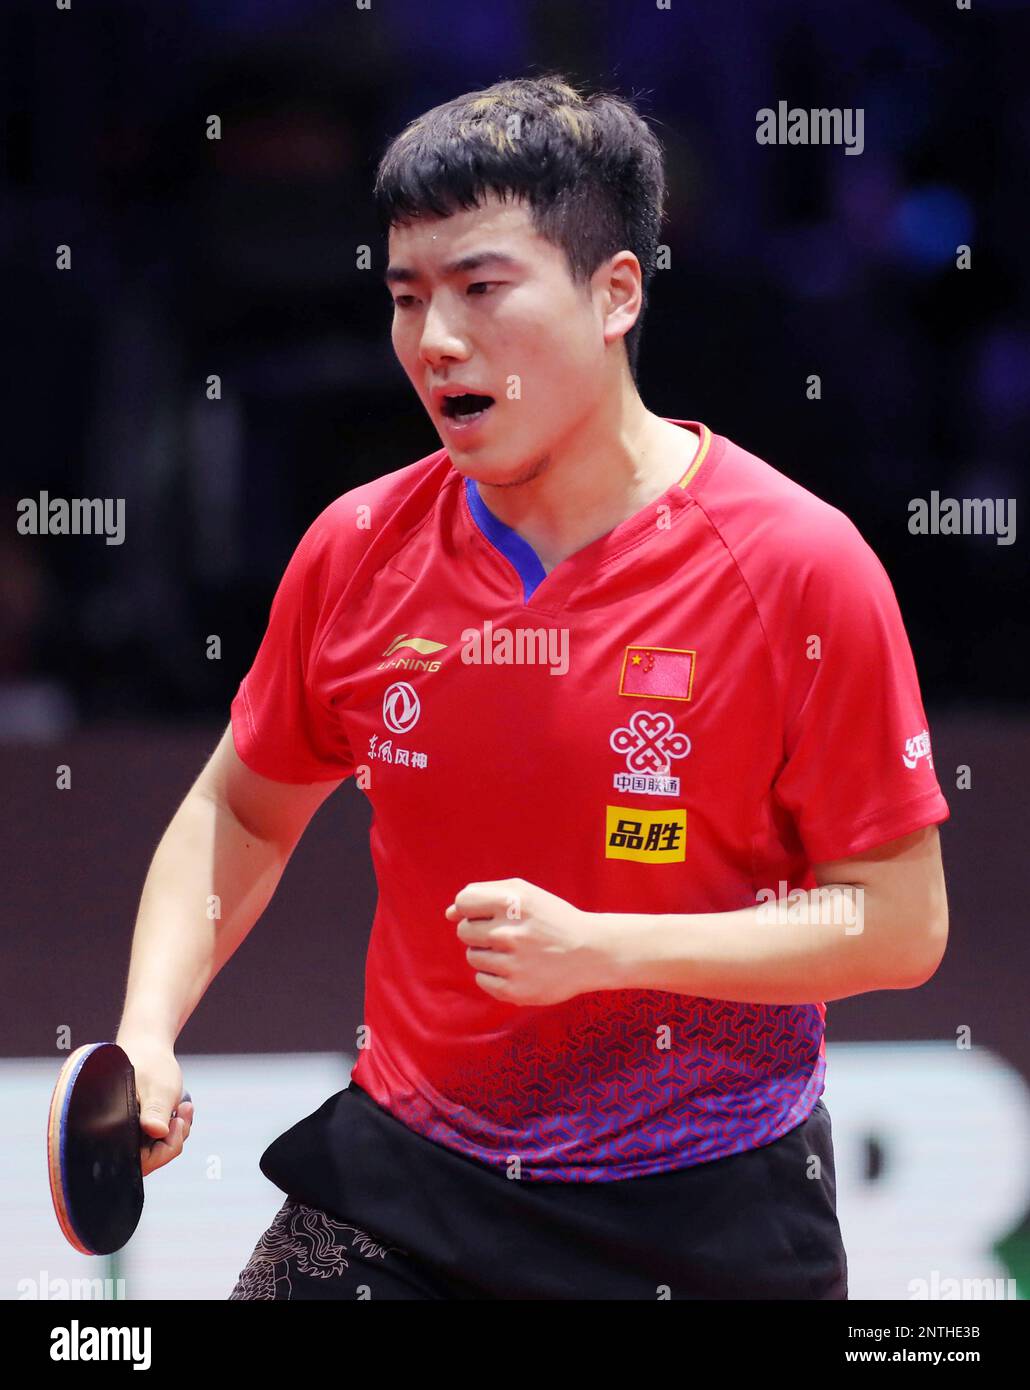 Chinas Ma Long celebrates after scoring during mens singles semifinal match of Liebherr 2019 ITTF World Table Tennis Championships against Chinas Liang Jingkun in Budapest, Hungary on April 27, 2019